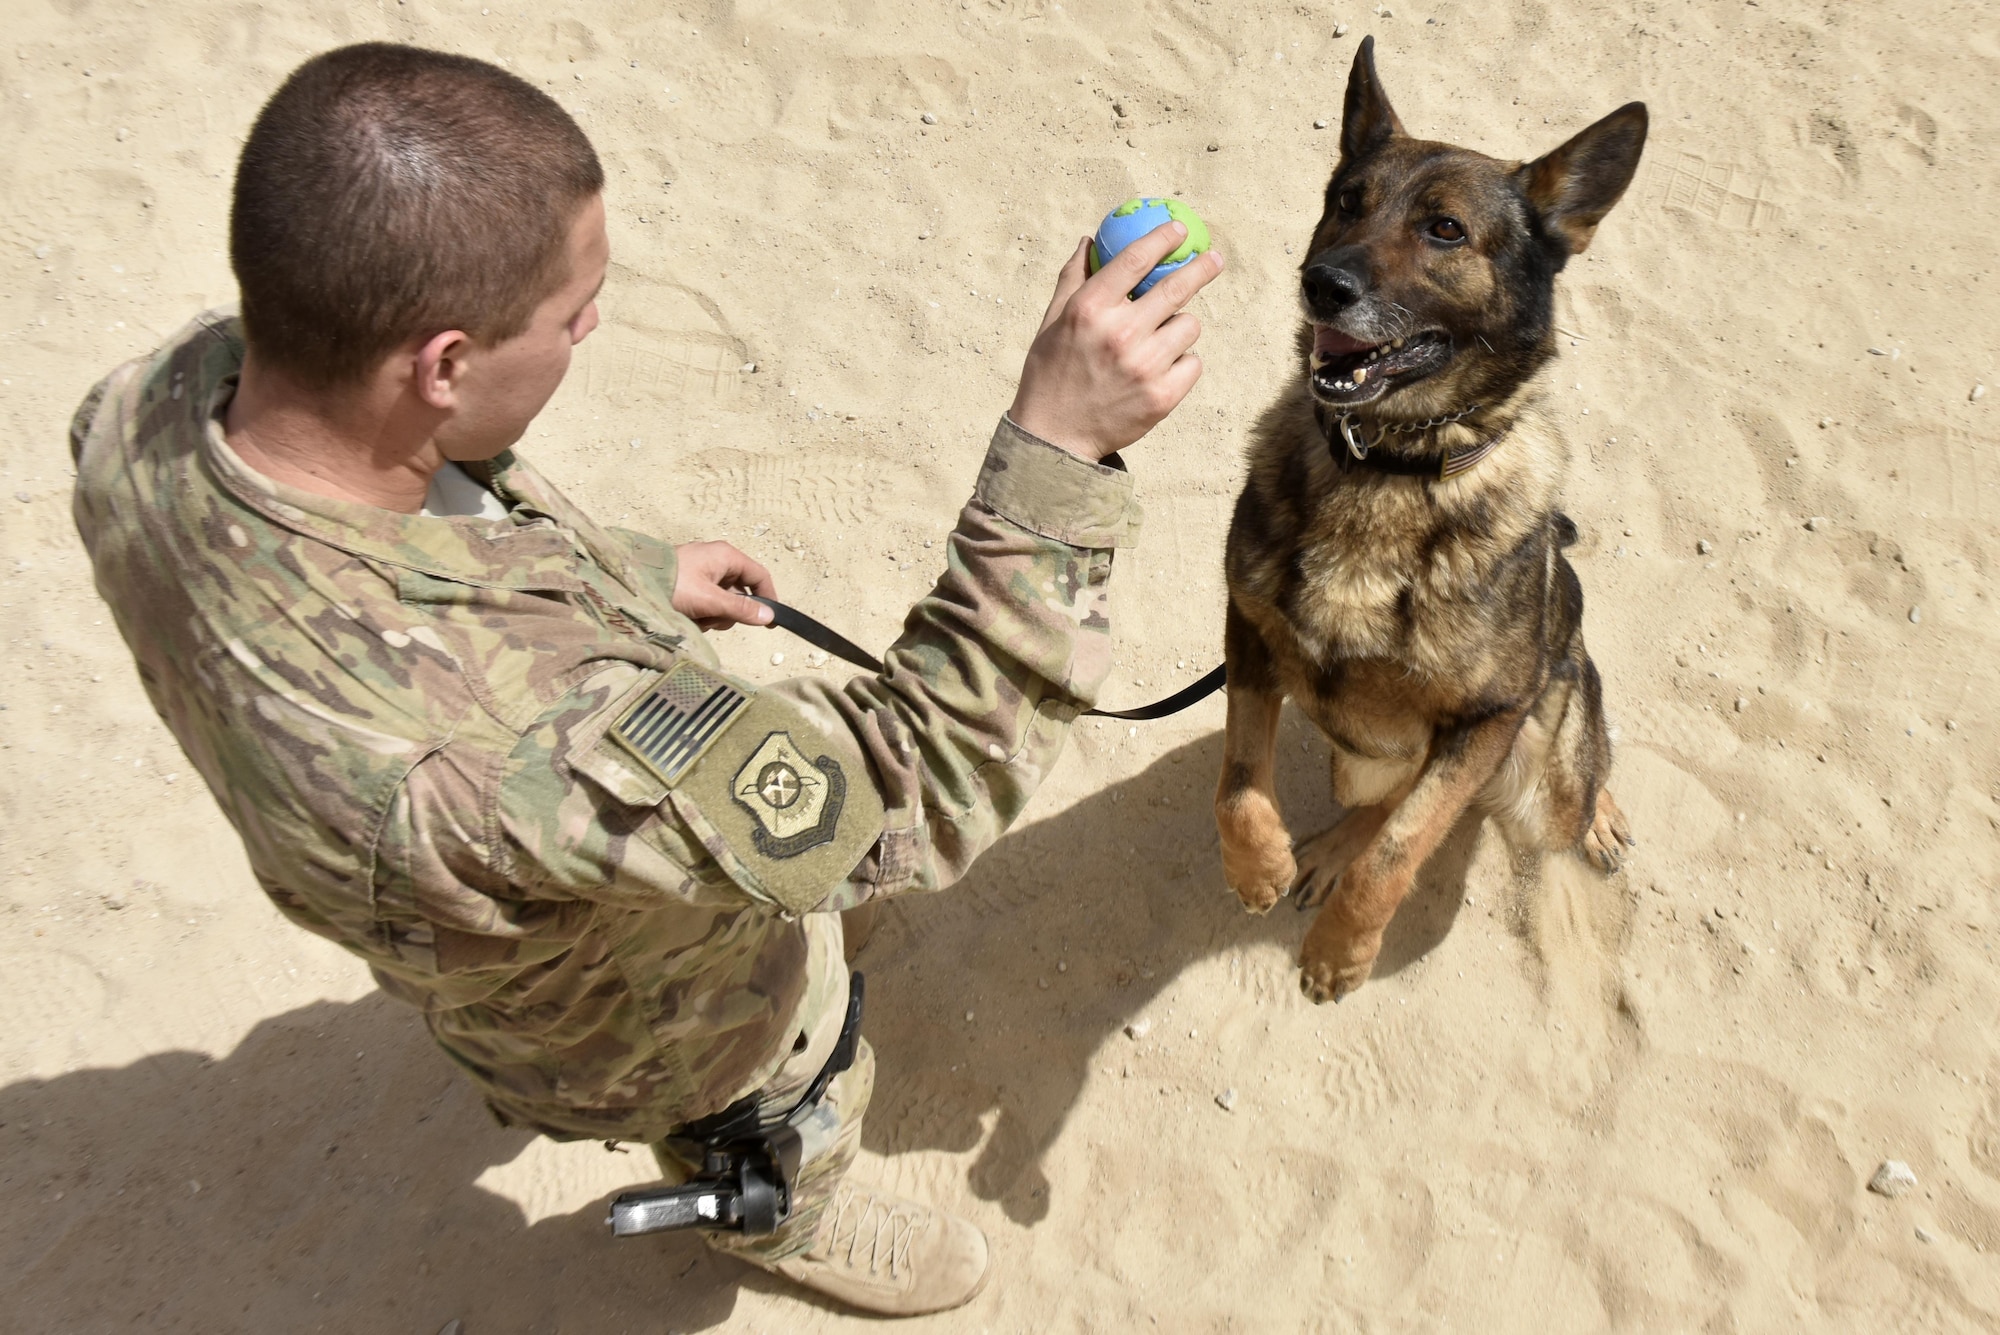 Senior Airman Carlton Isaacson, 407th Expeditionary Security Forces military working dog handler, plays with Egon, 407th ESFS military working dog, after an obsticle course training session May 23, 2017, at the 407th Air Expeditionary Group in Southwest Asia. Isaacson and Egon have been partnered for approximately a year and a half. (U.S. Air Force photo by Senior Airman Ramon A. Adelan)